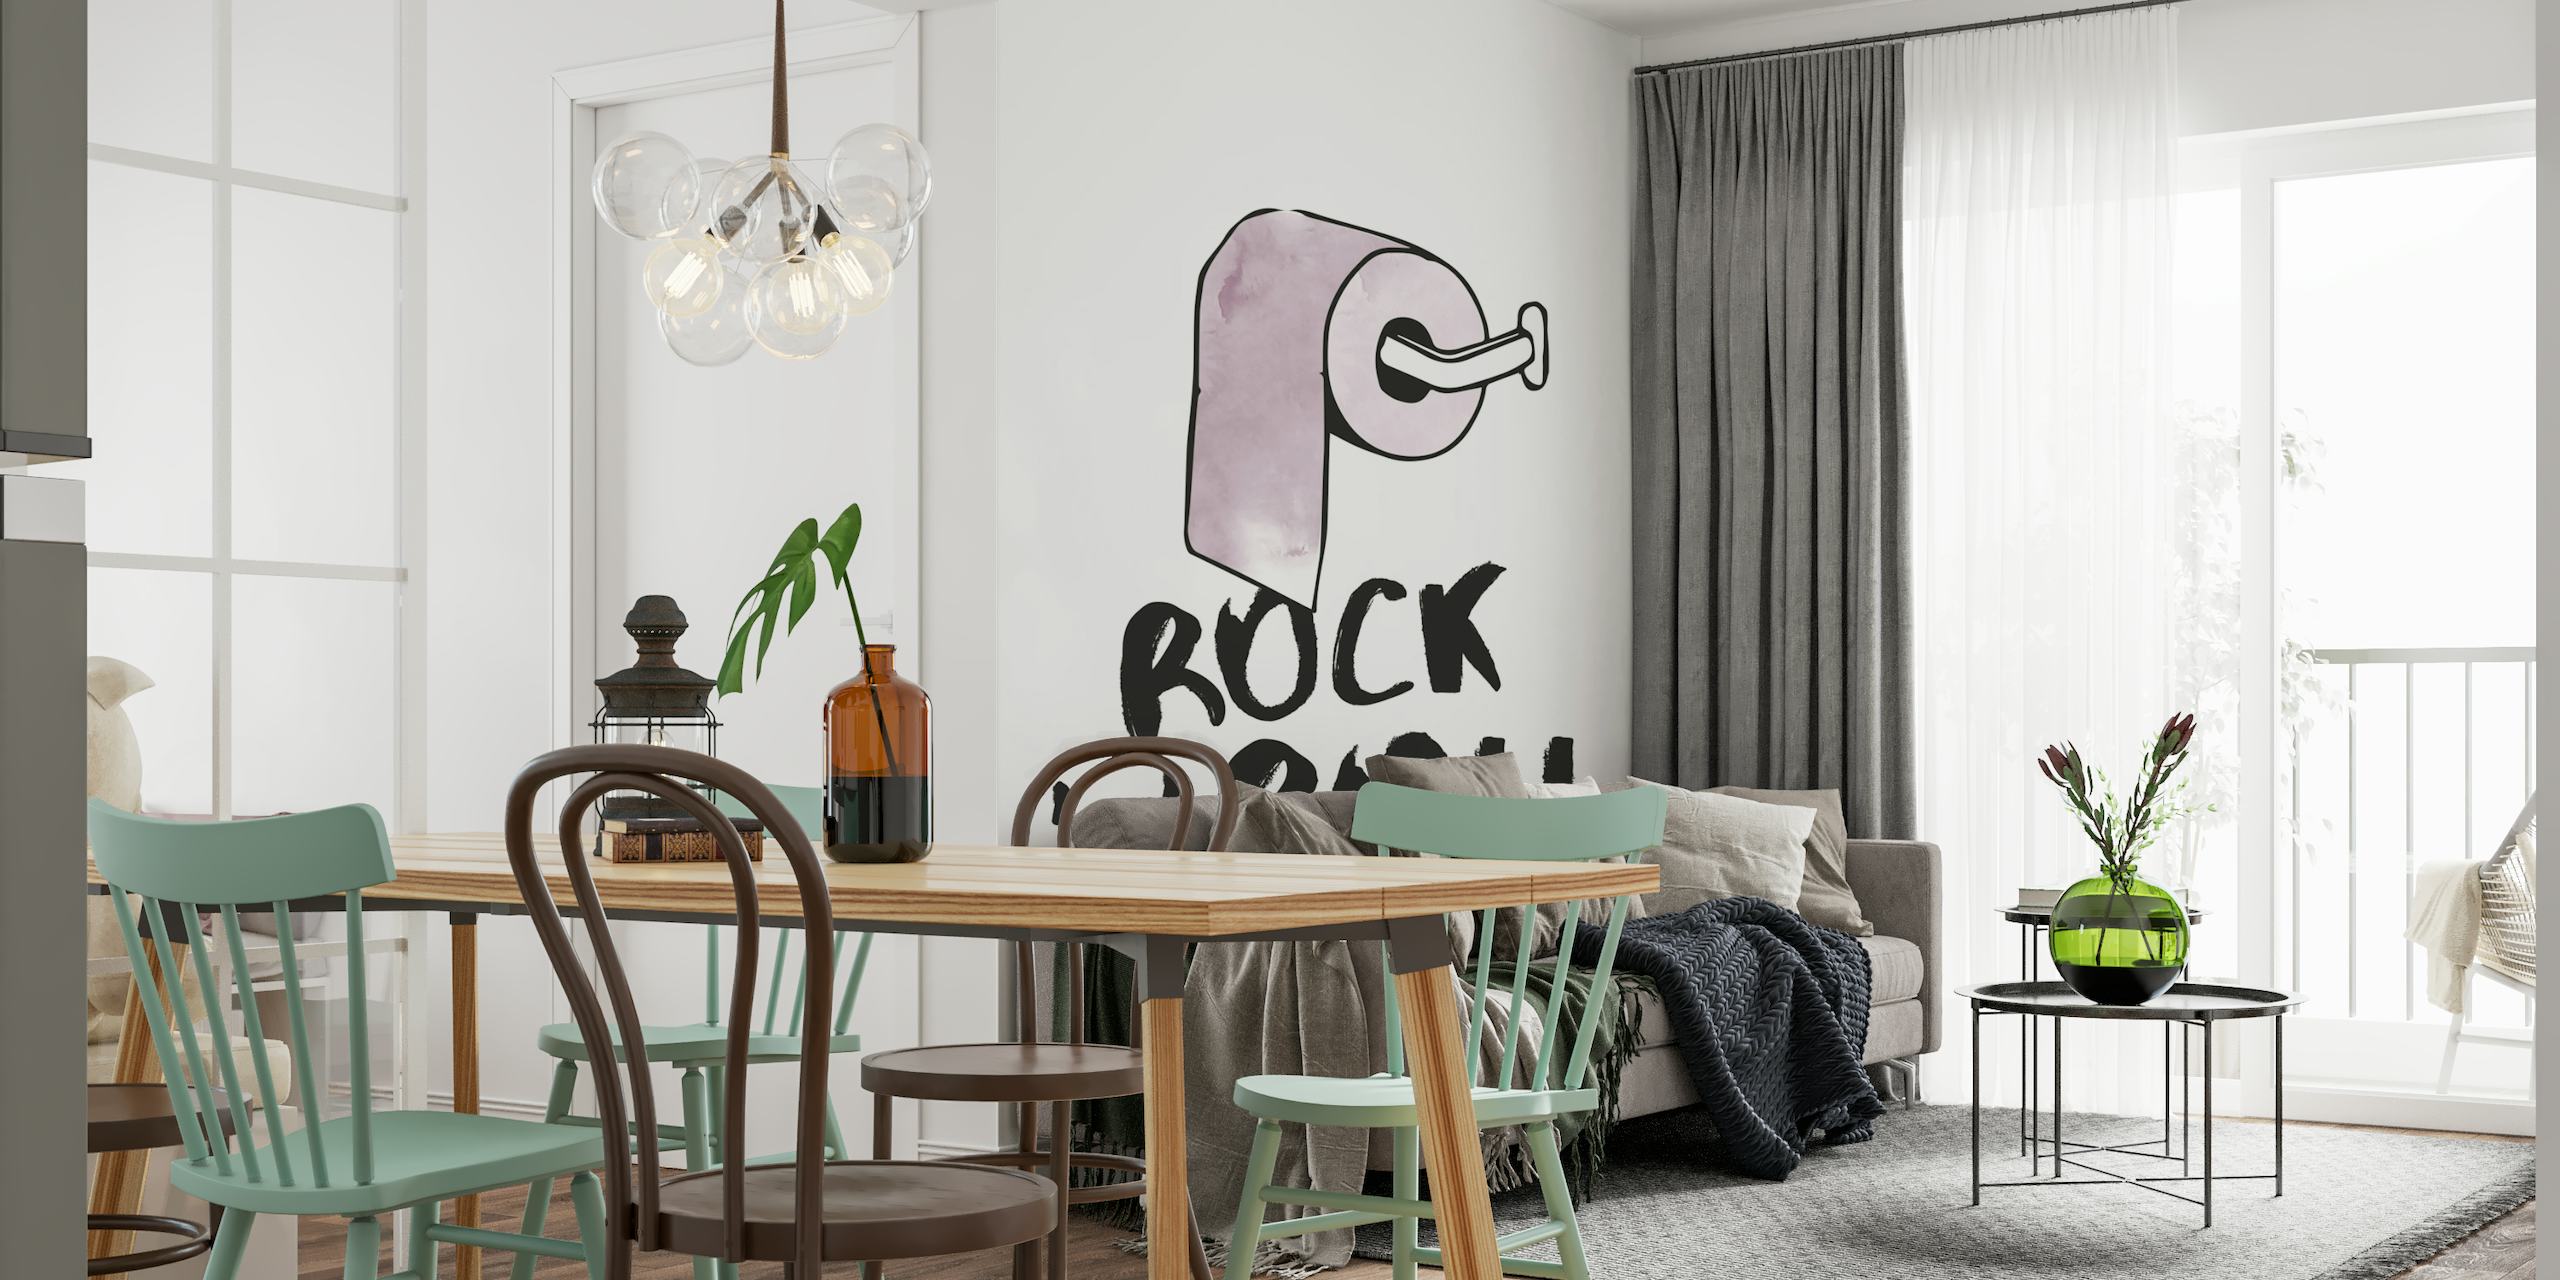 Authentic Rock 'n' Roll wallpaper for music enthusiasts